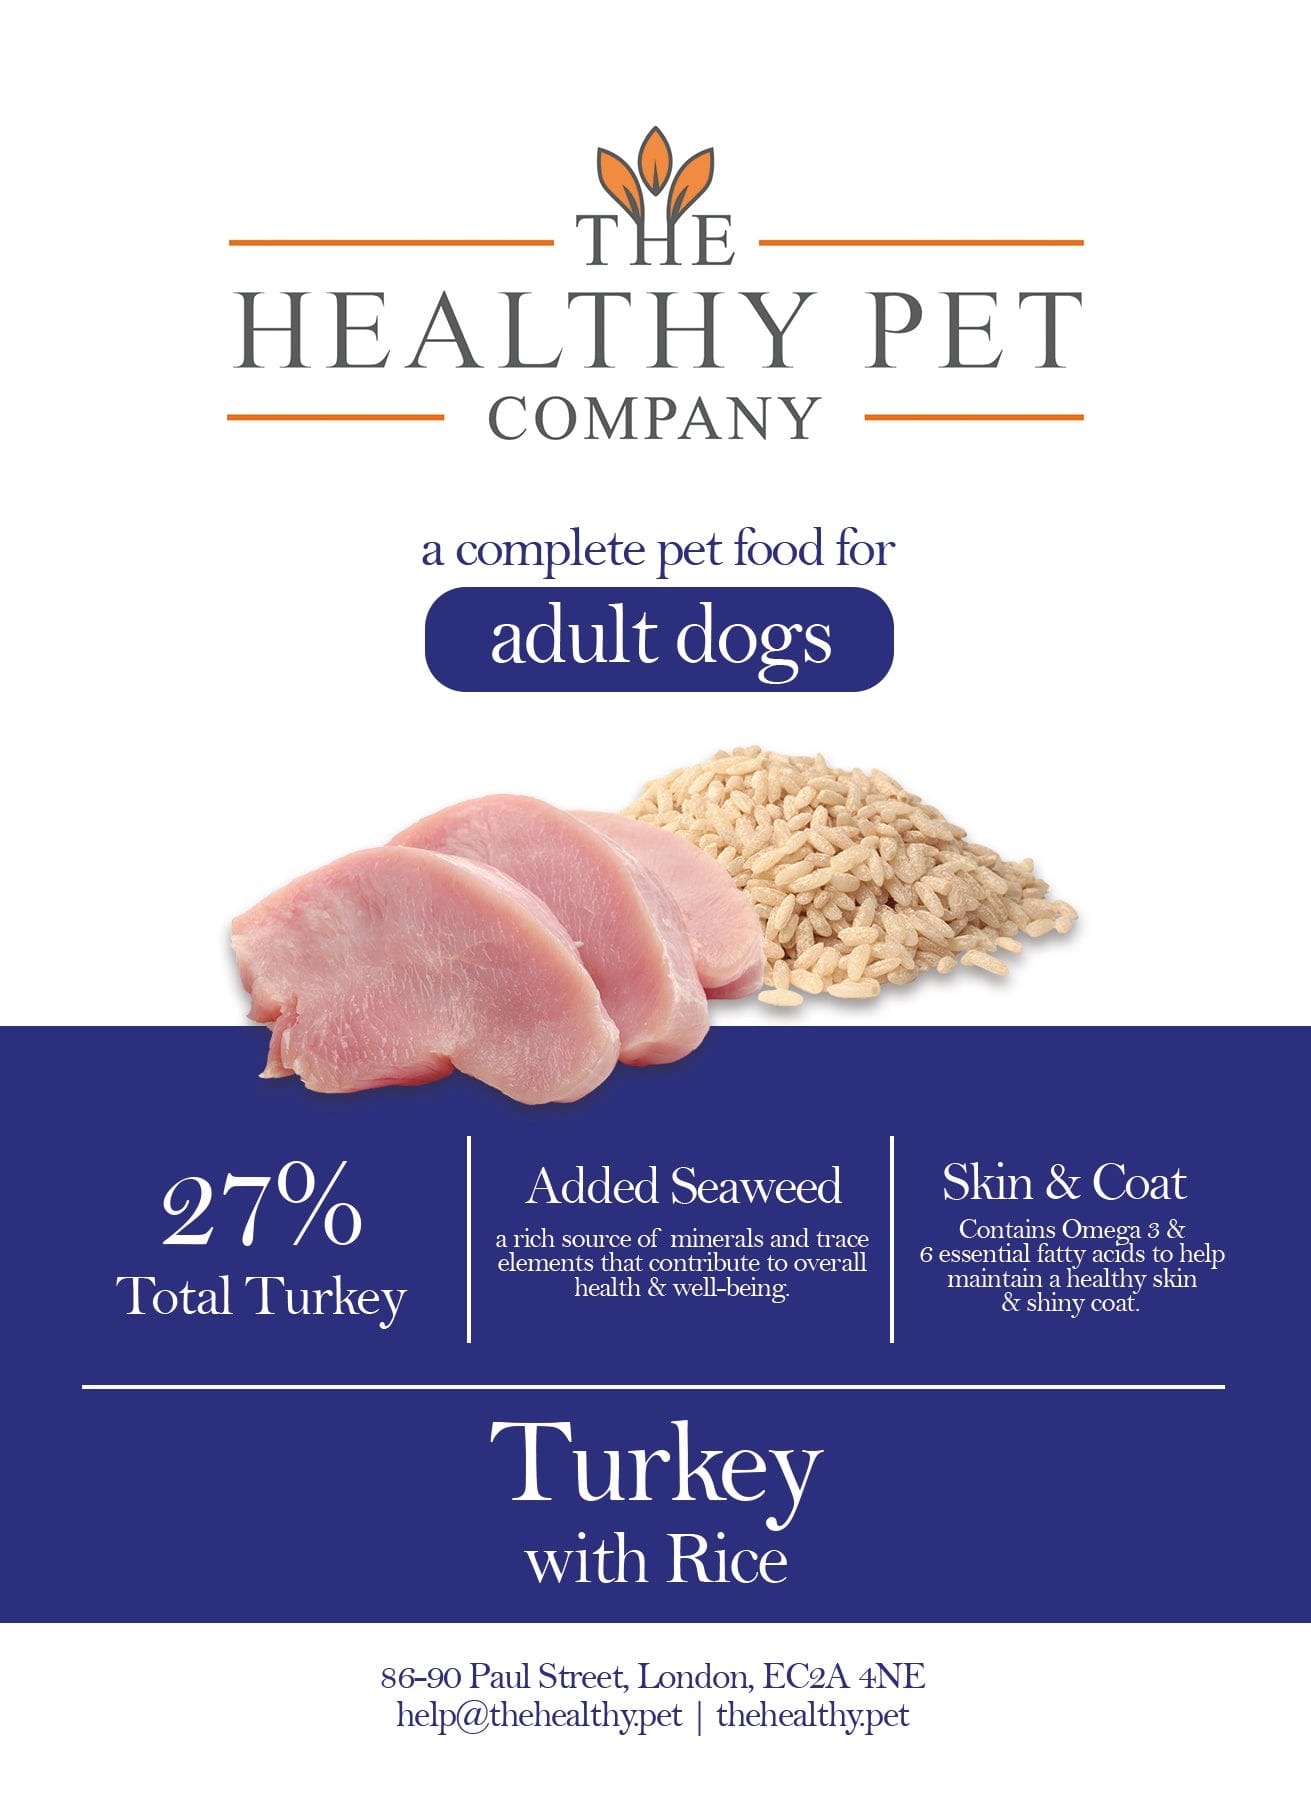 The Healthy Pet Company Complete Meal - Turkey with Rice for Adult Dogs - The Healthy Pet Company